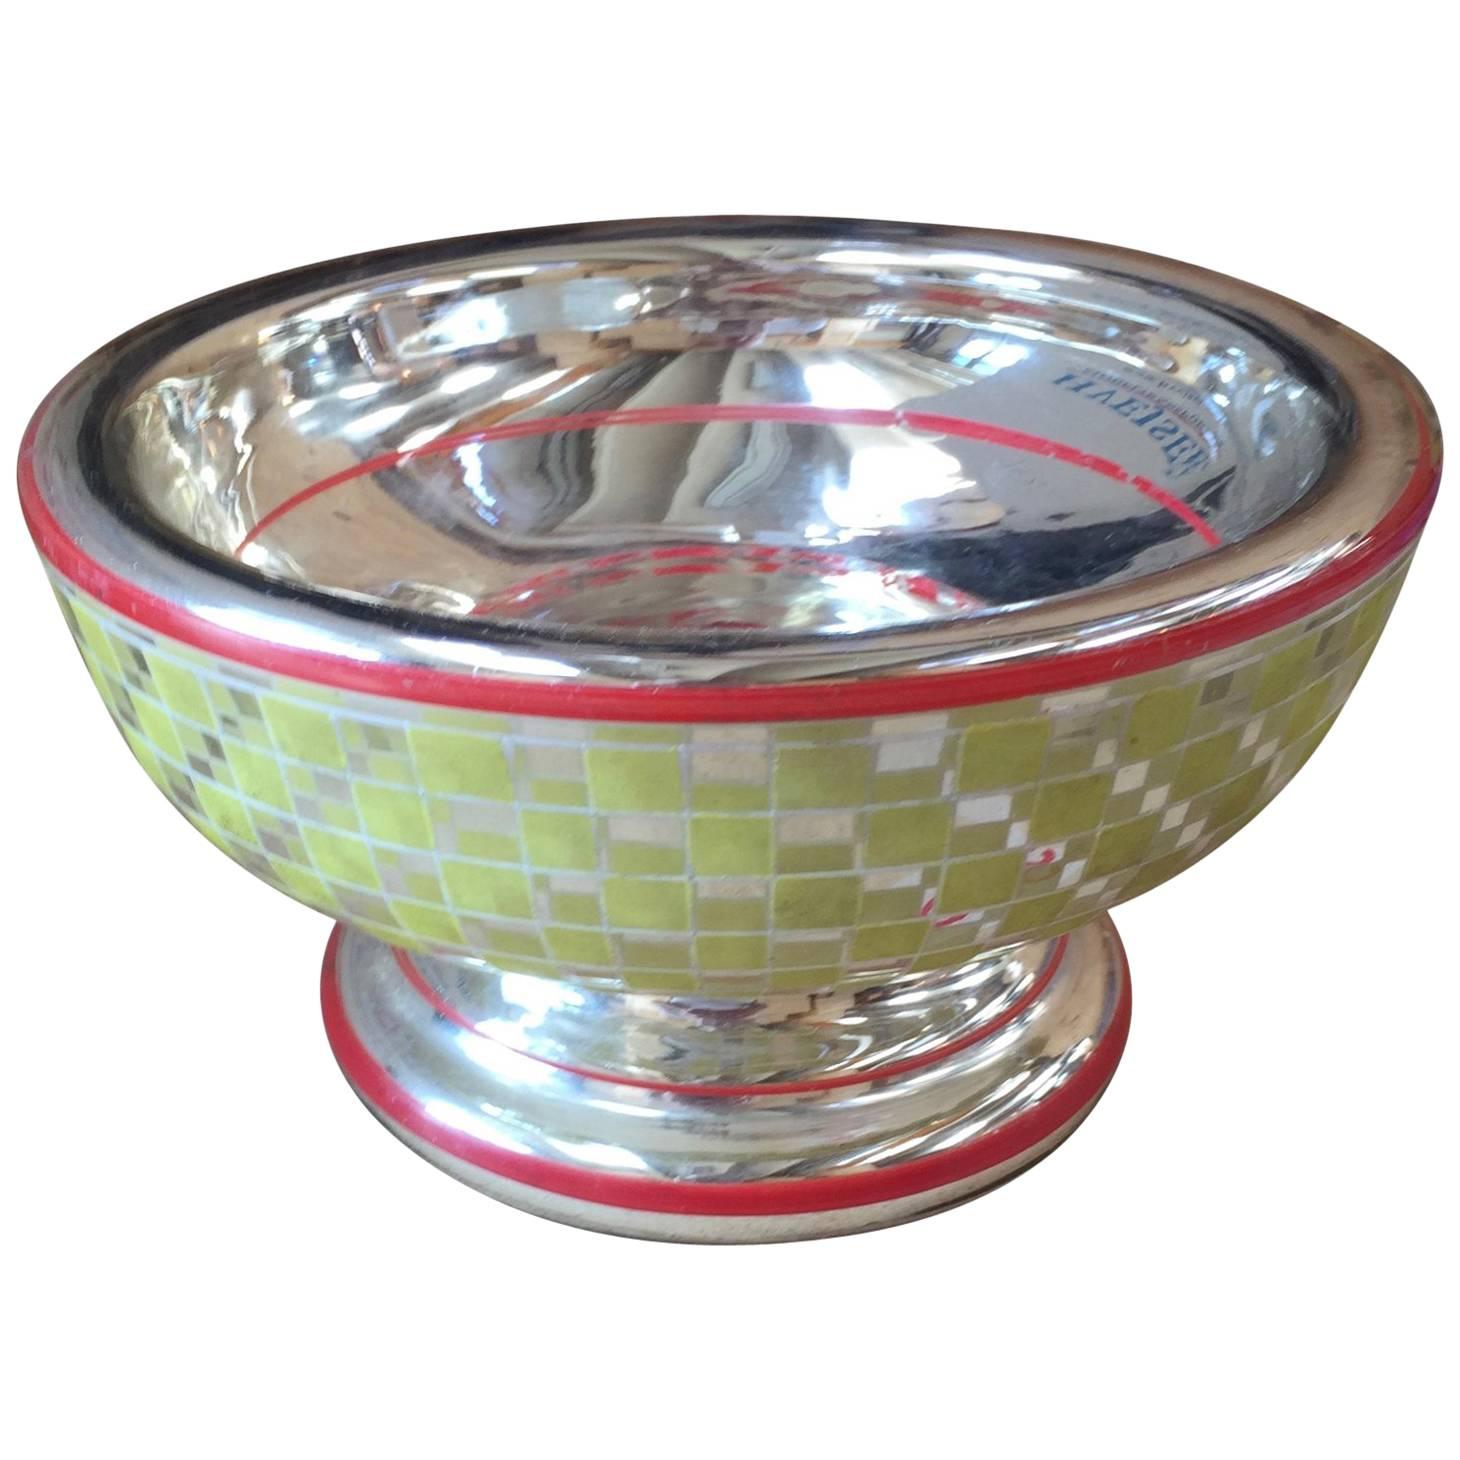 Painted silver plated glass bowl in mercury silver or poormans silver, France.
For sweets or as a decorative object for Christmas.